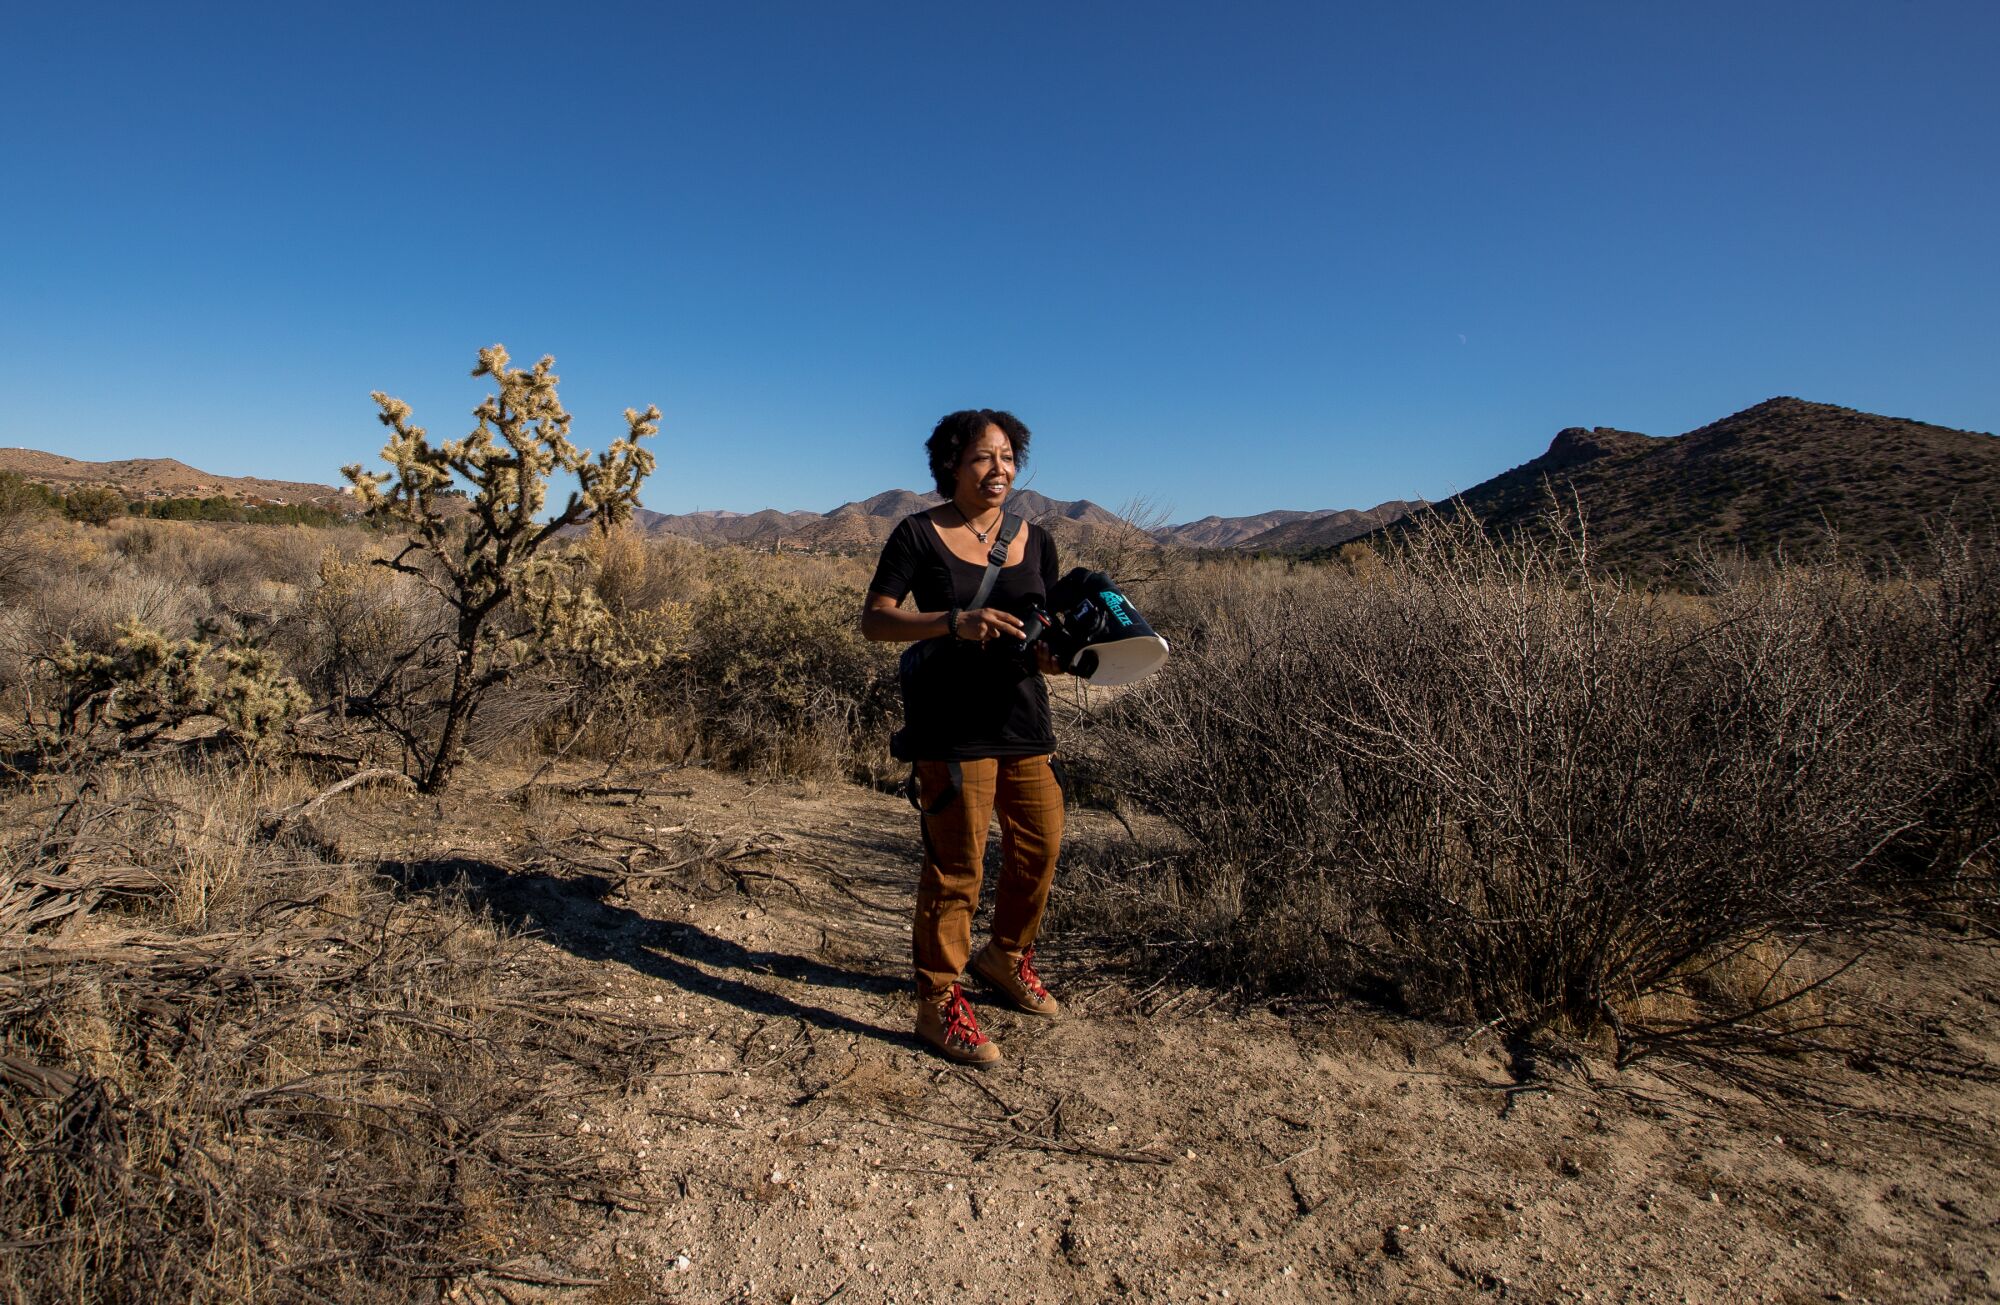 Krystle Hickman standing amid desert chaparral with her camera.